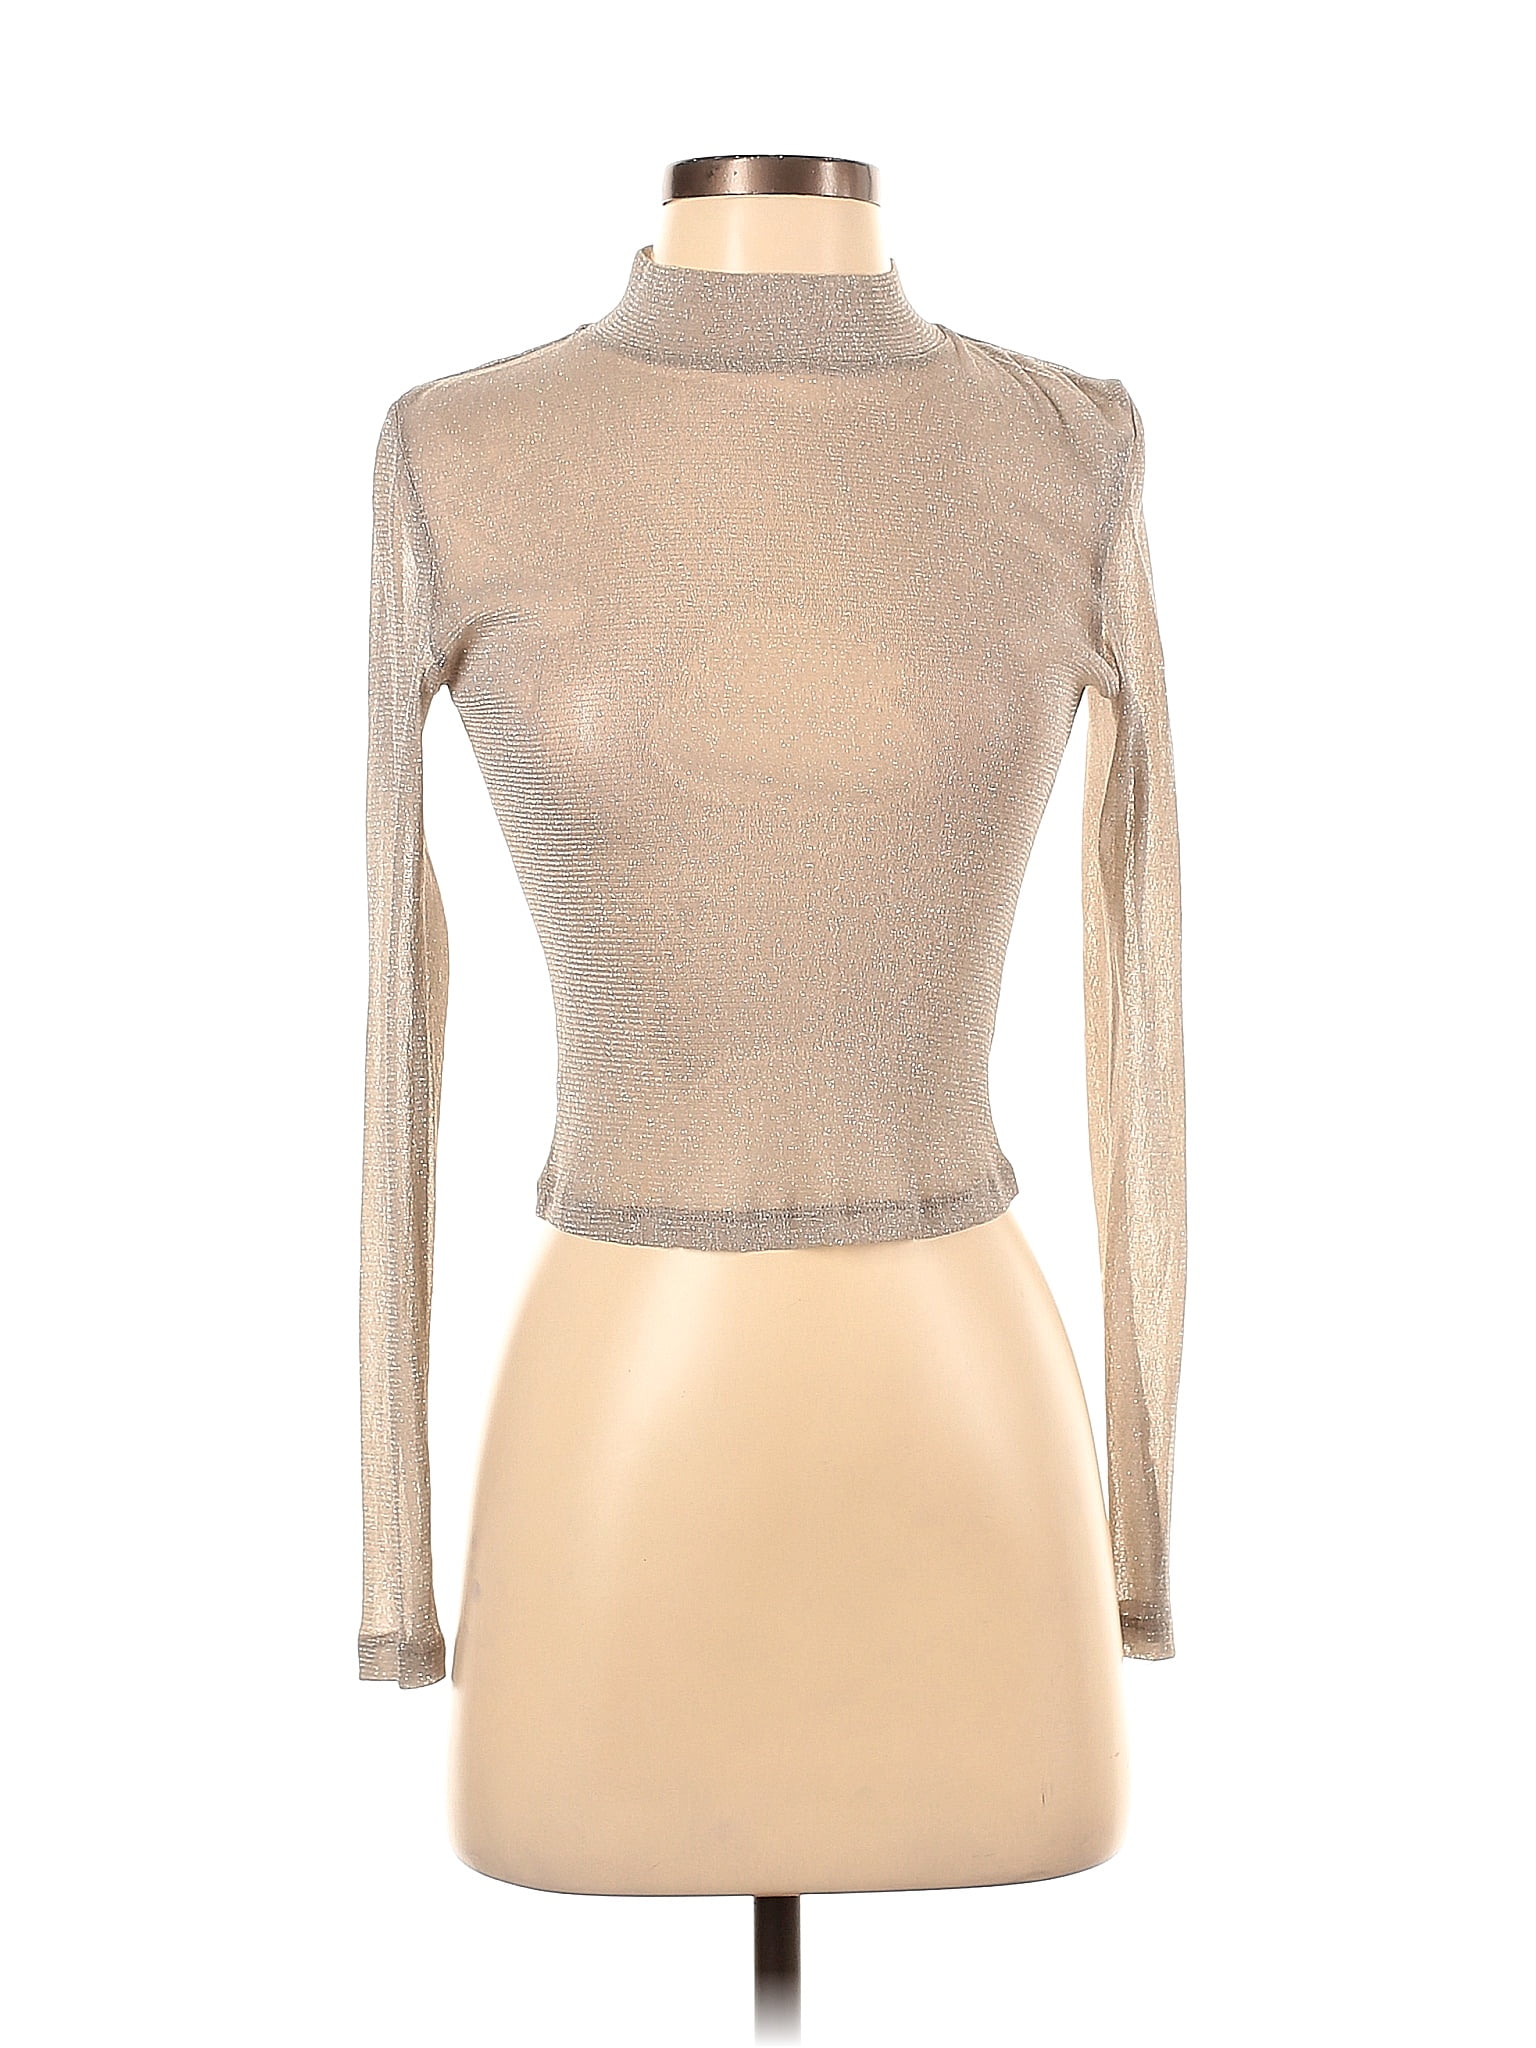 Wild Fable Solid Tan Long Sleeve Top Size XS - 33% off